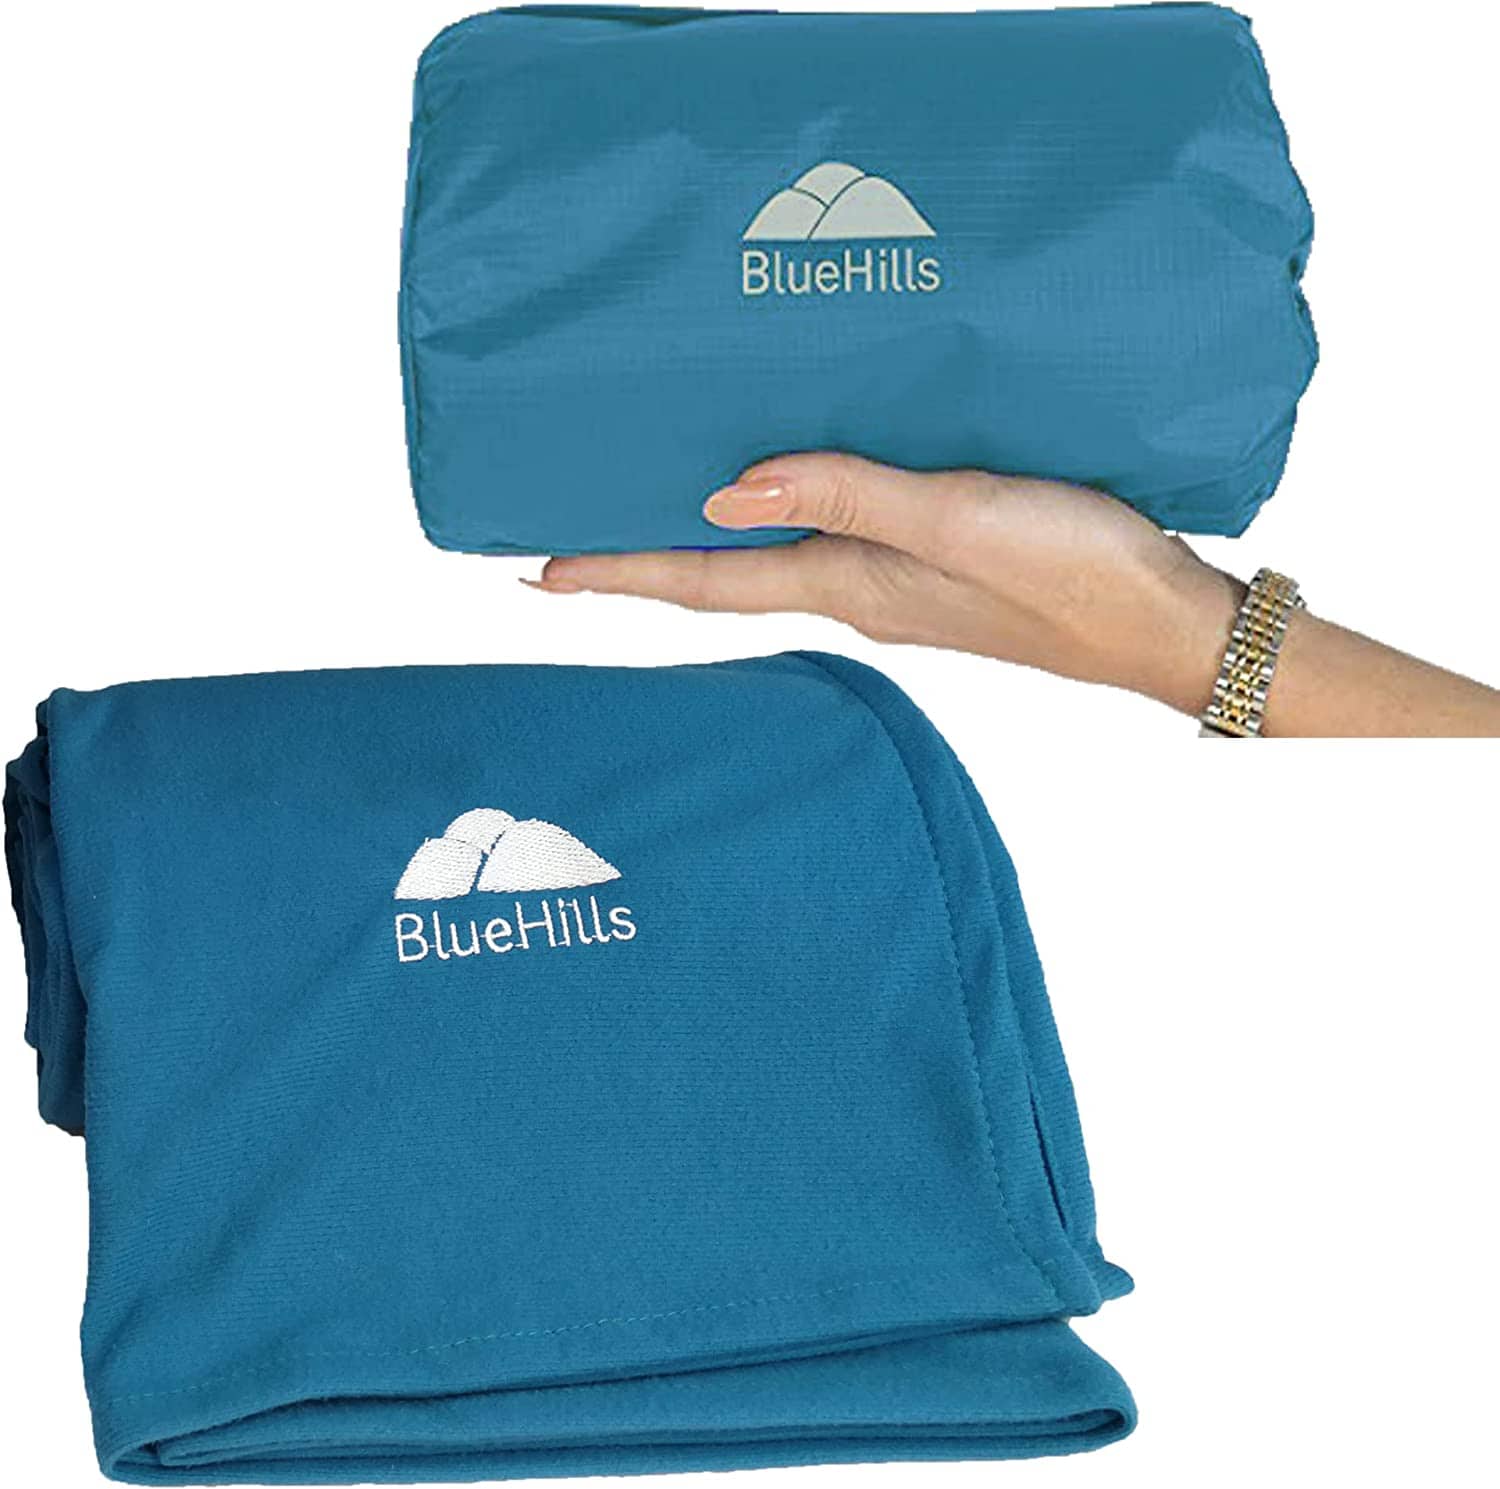 BlueHills Ultra Compact Travel Blanket in Portable Case Premium Soft Large Airplane Blanket